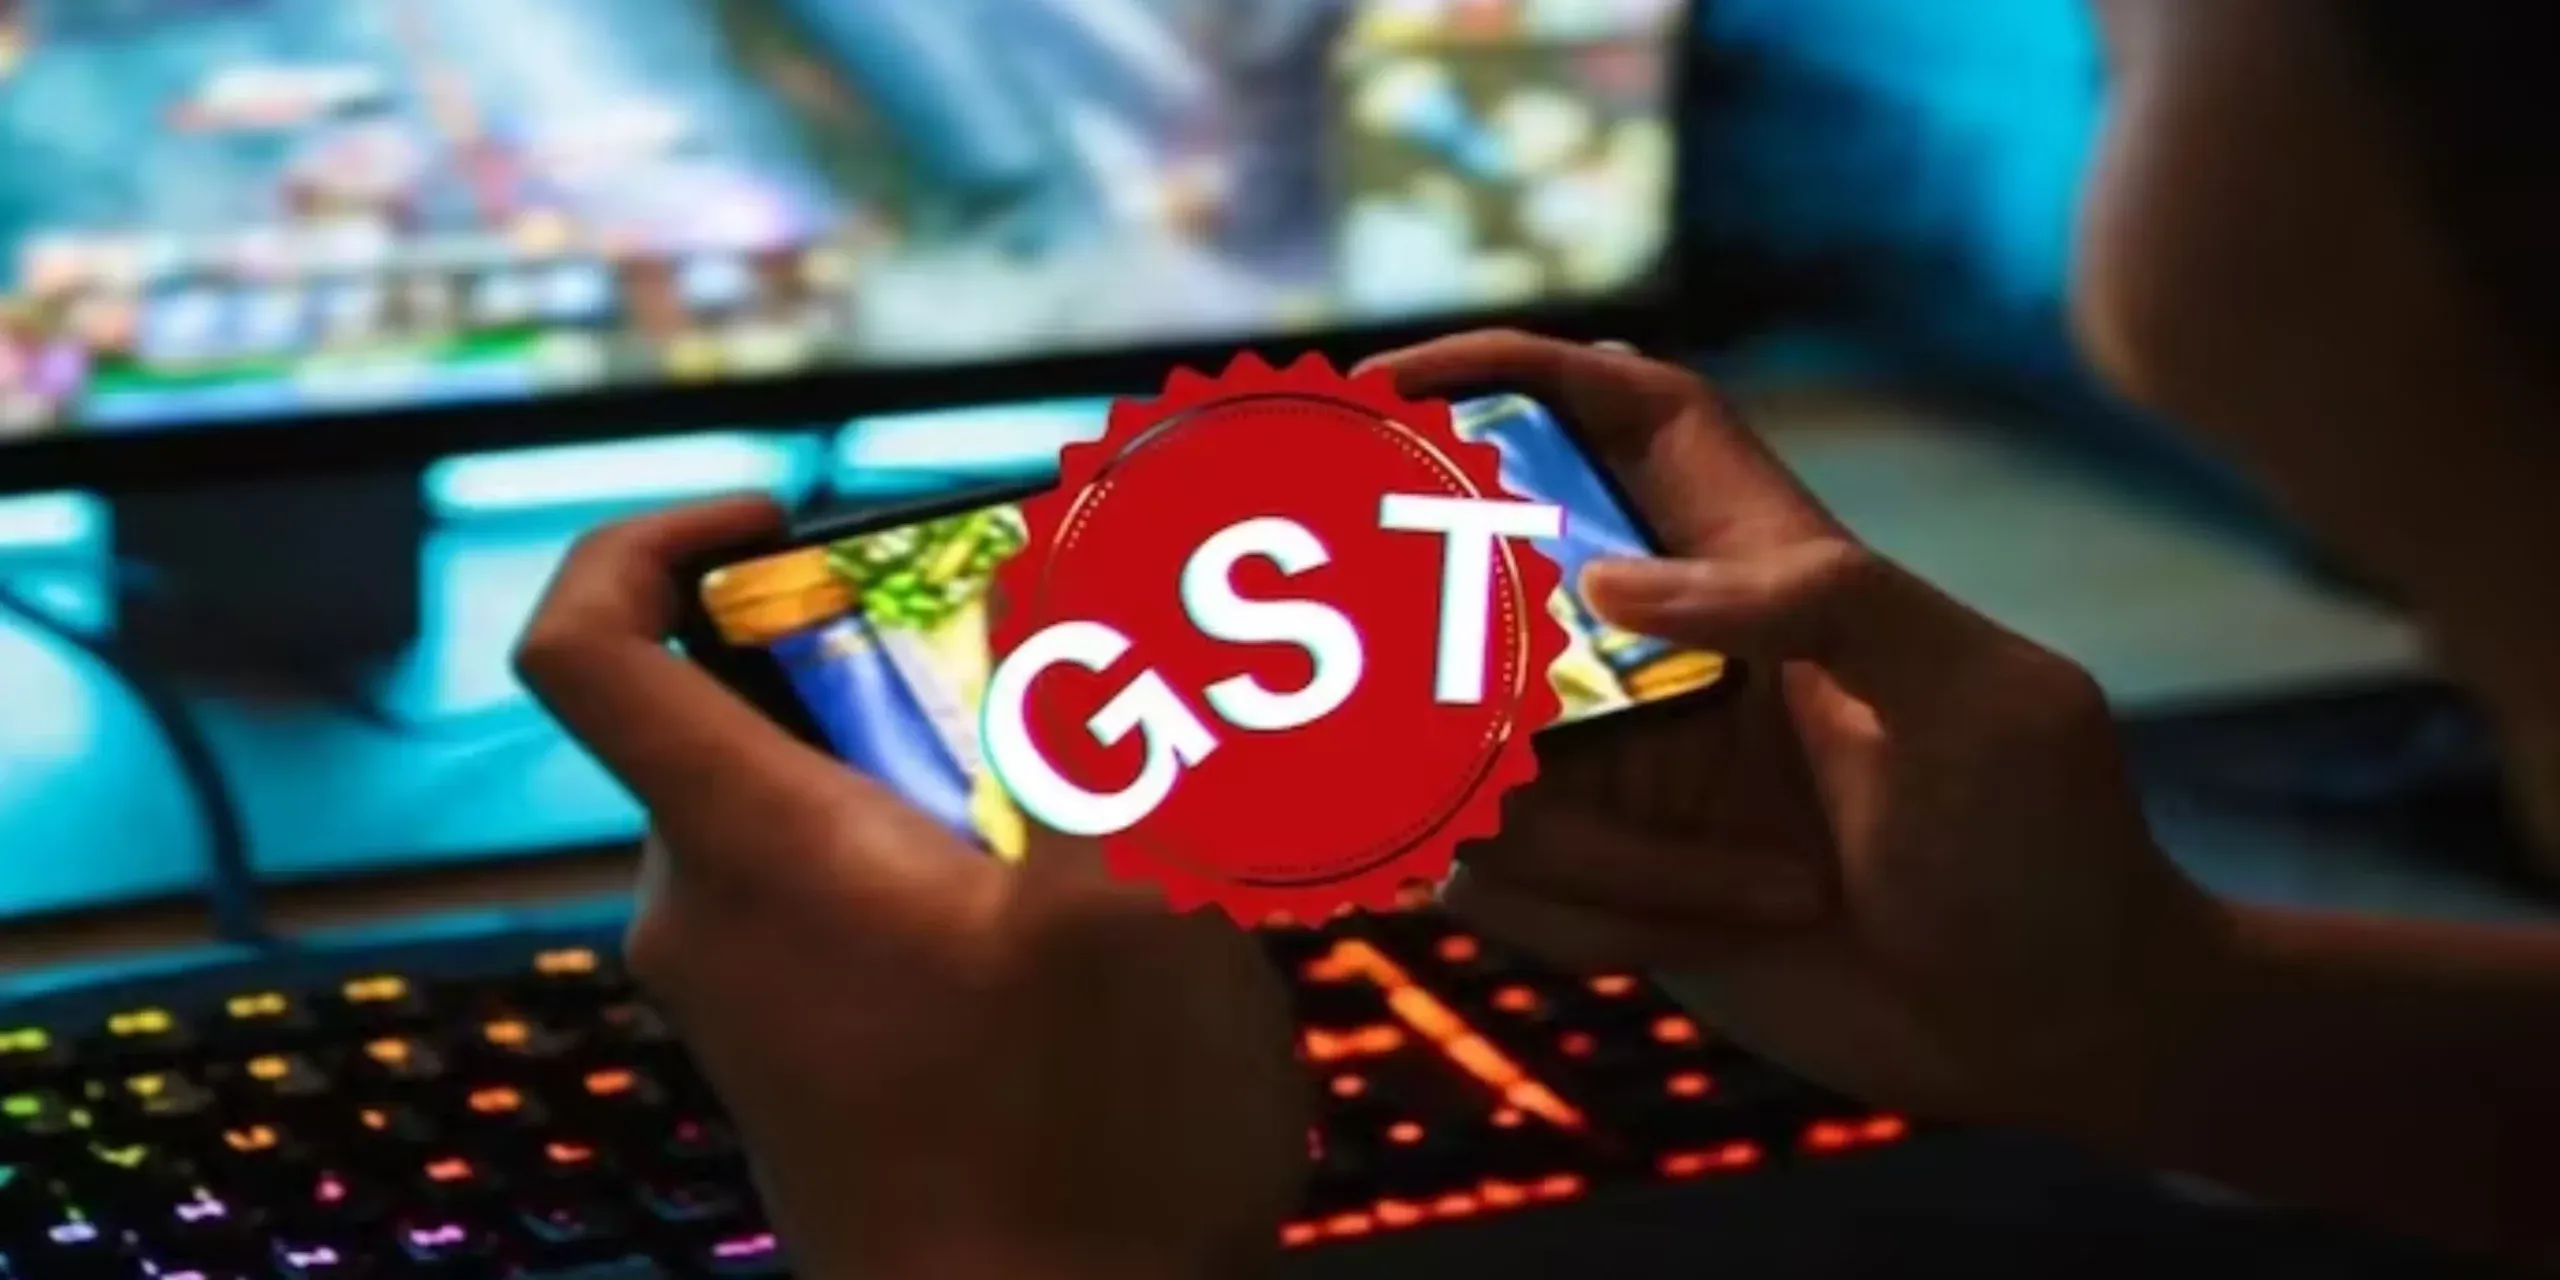 Government likely to issue Ordinance to impose GST of 28 per cent on online gaming